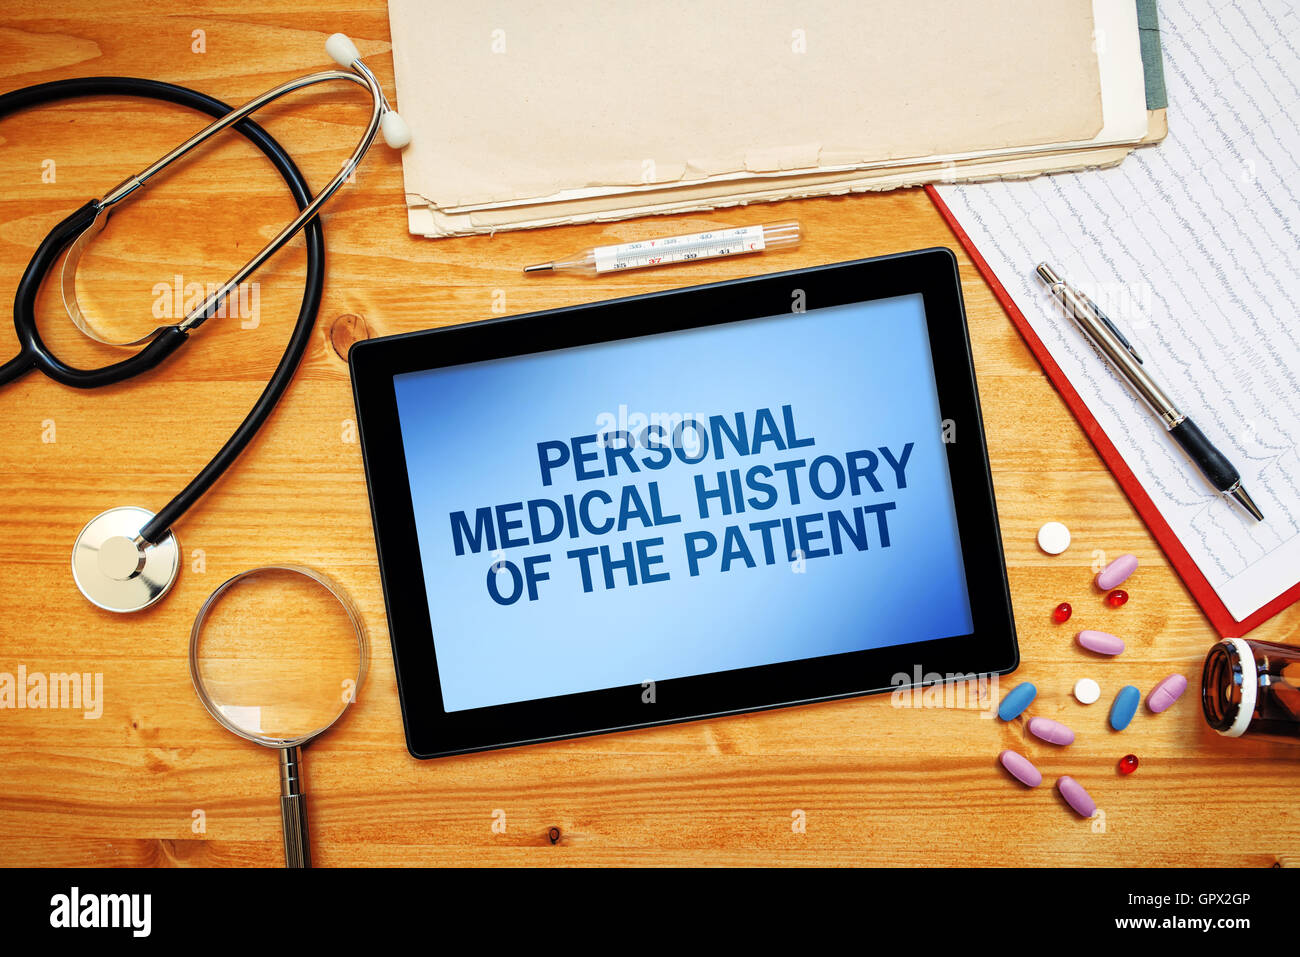 Personal medical history of the patient, healthcare concept with doctor's worskspace top view Stock Photo